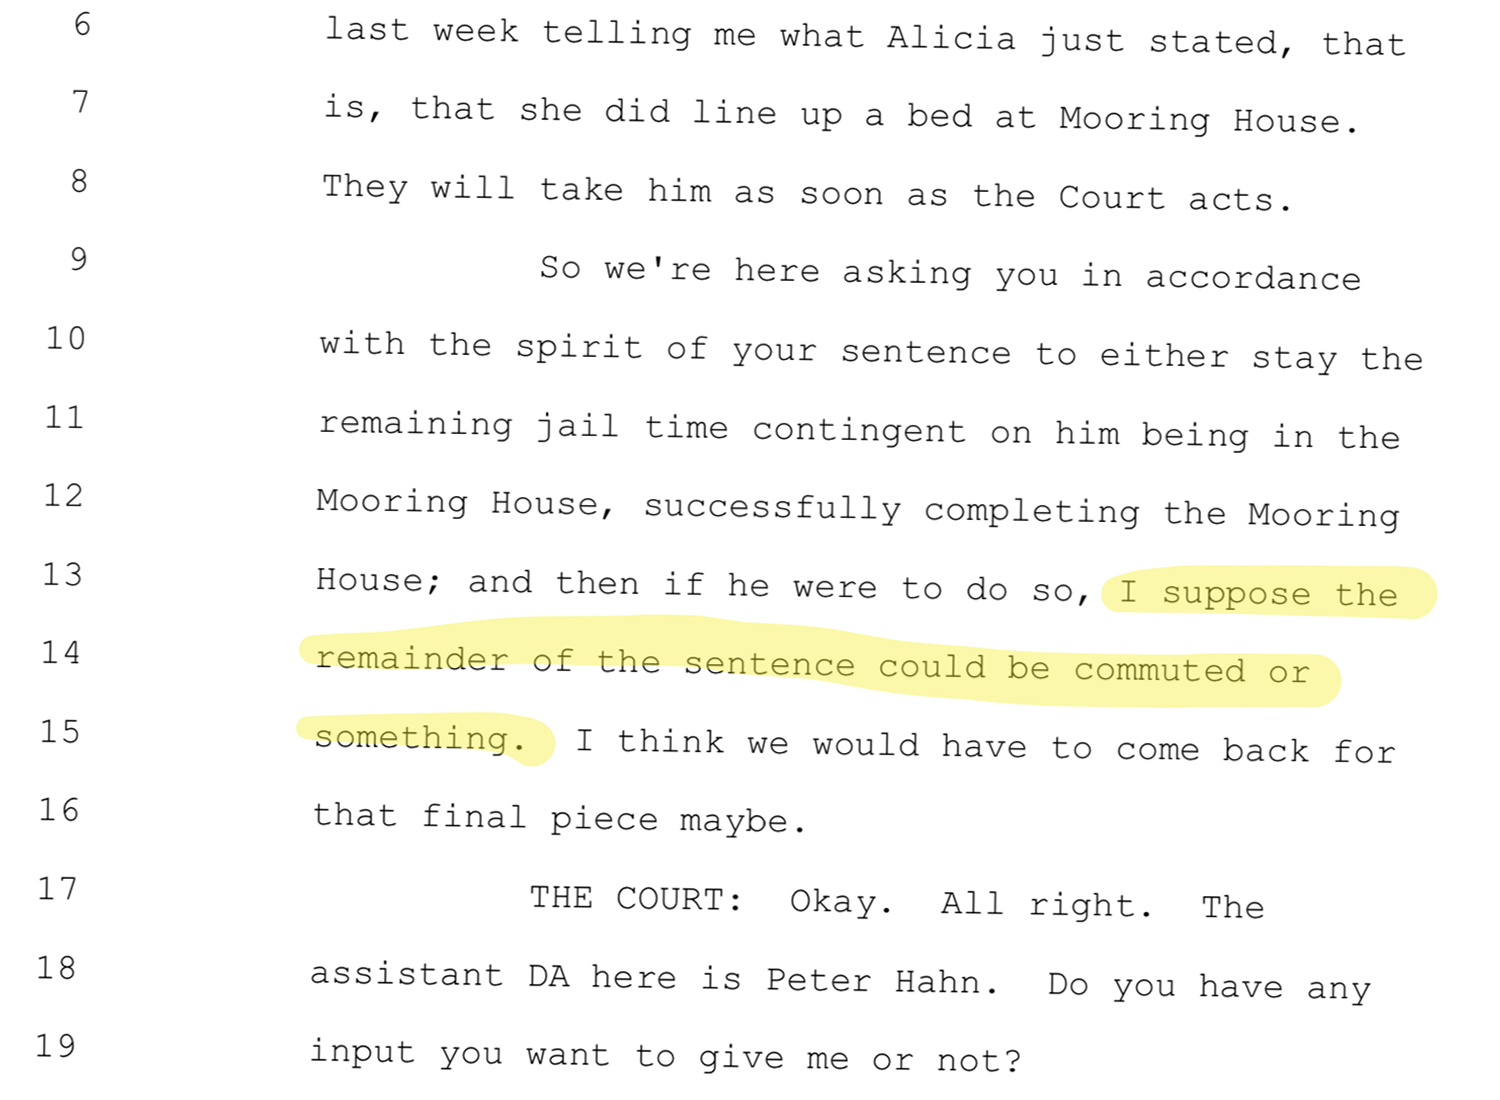 A screenshot from a court transcript with a highlighted portion reading "I suppose the remainder of the sentence could be commuted or something."